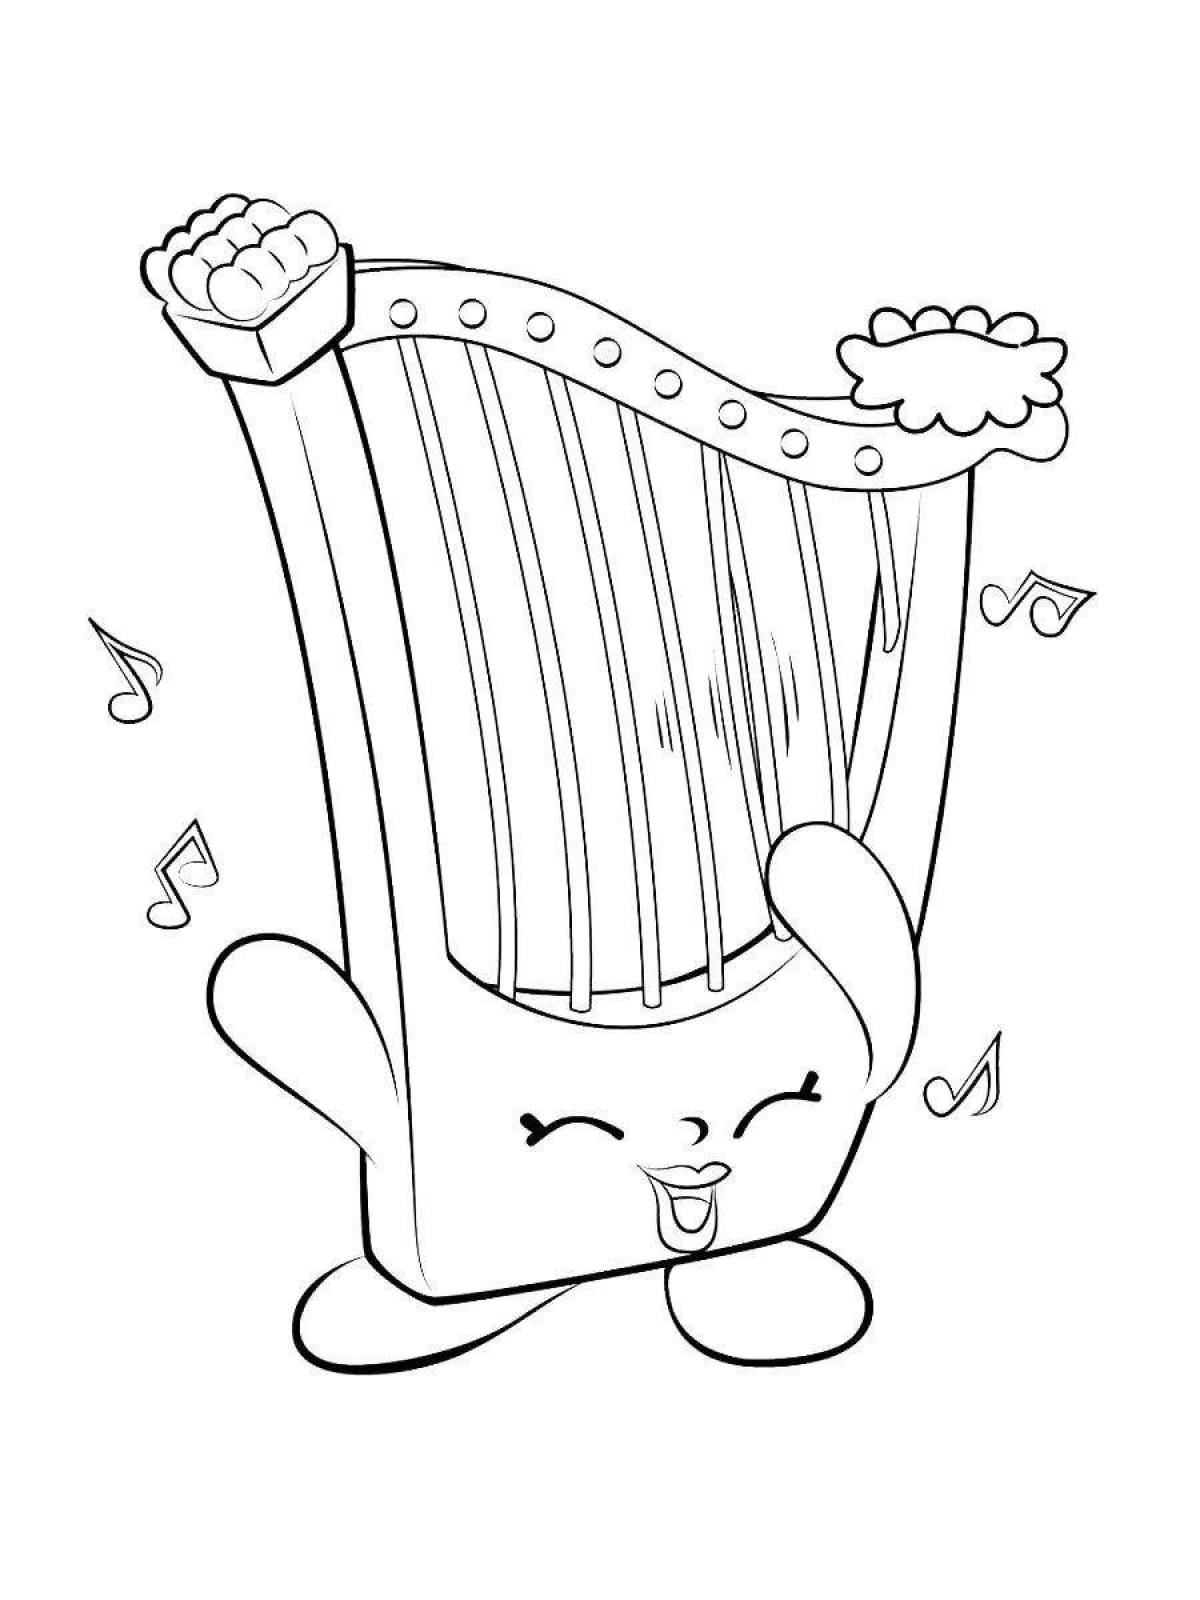 Shiny harp coloring book for kids